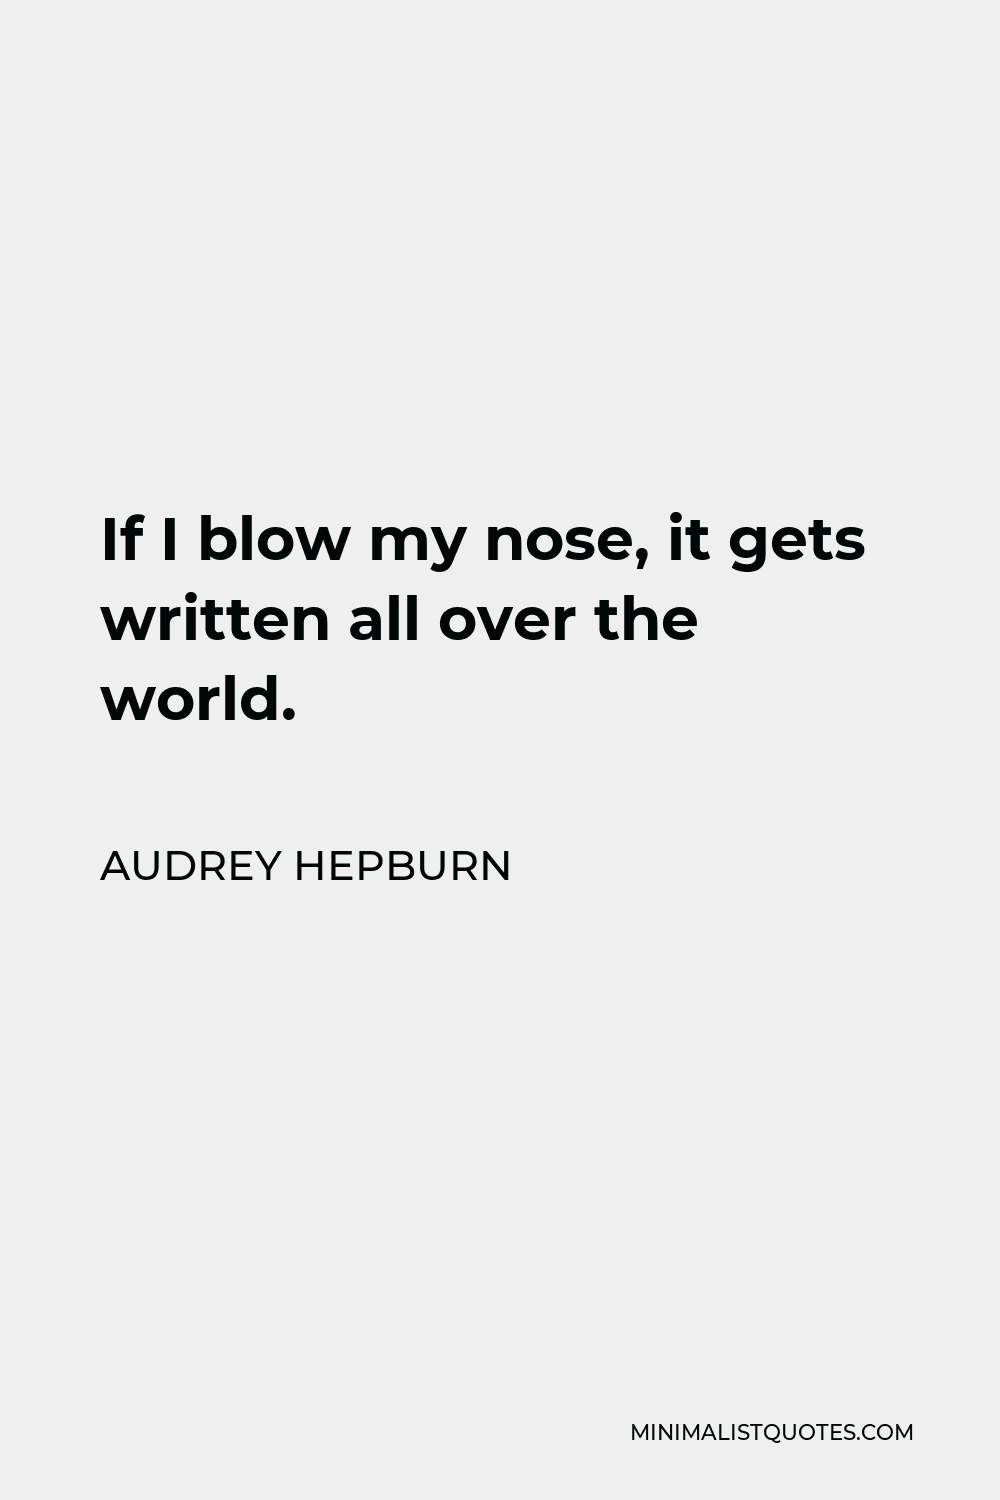 Audrey Hepburn Quote - If I blow my nose, it gets written all over the world.